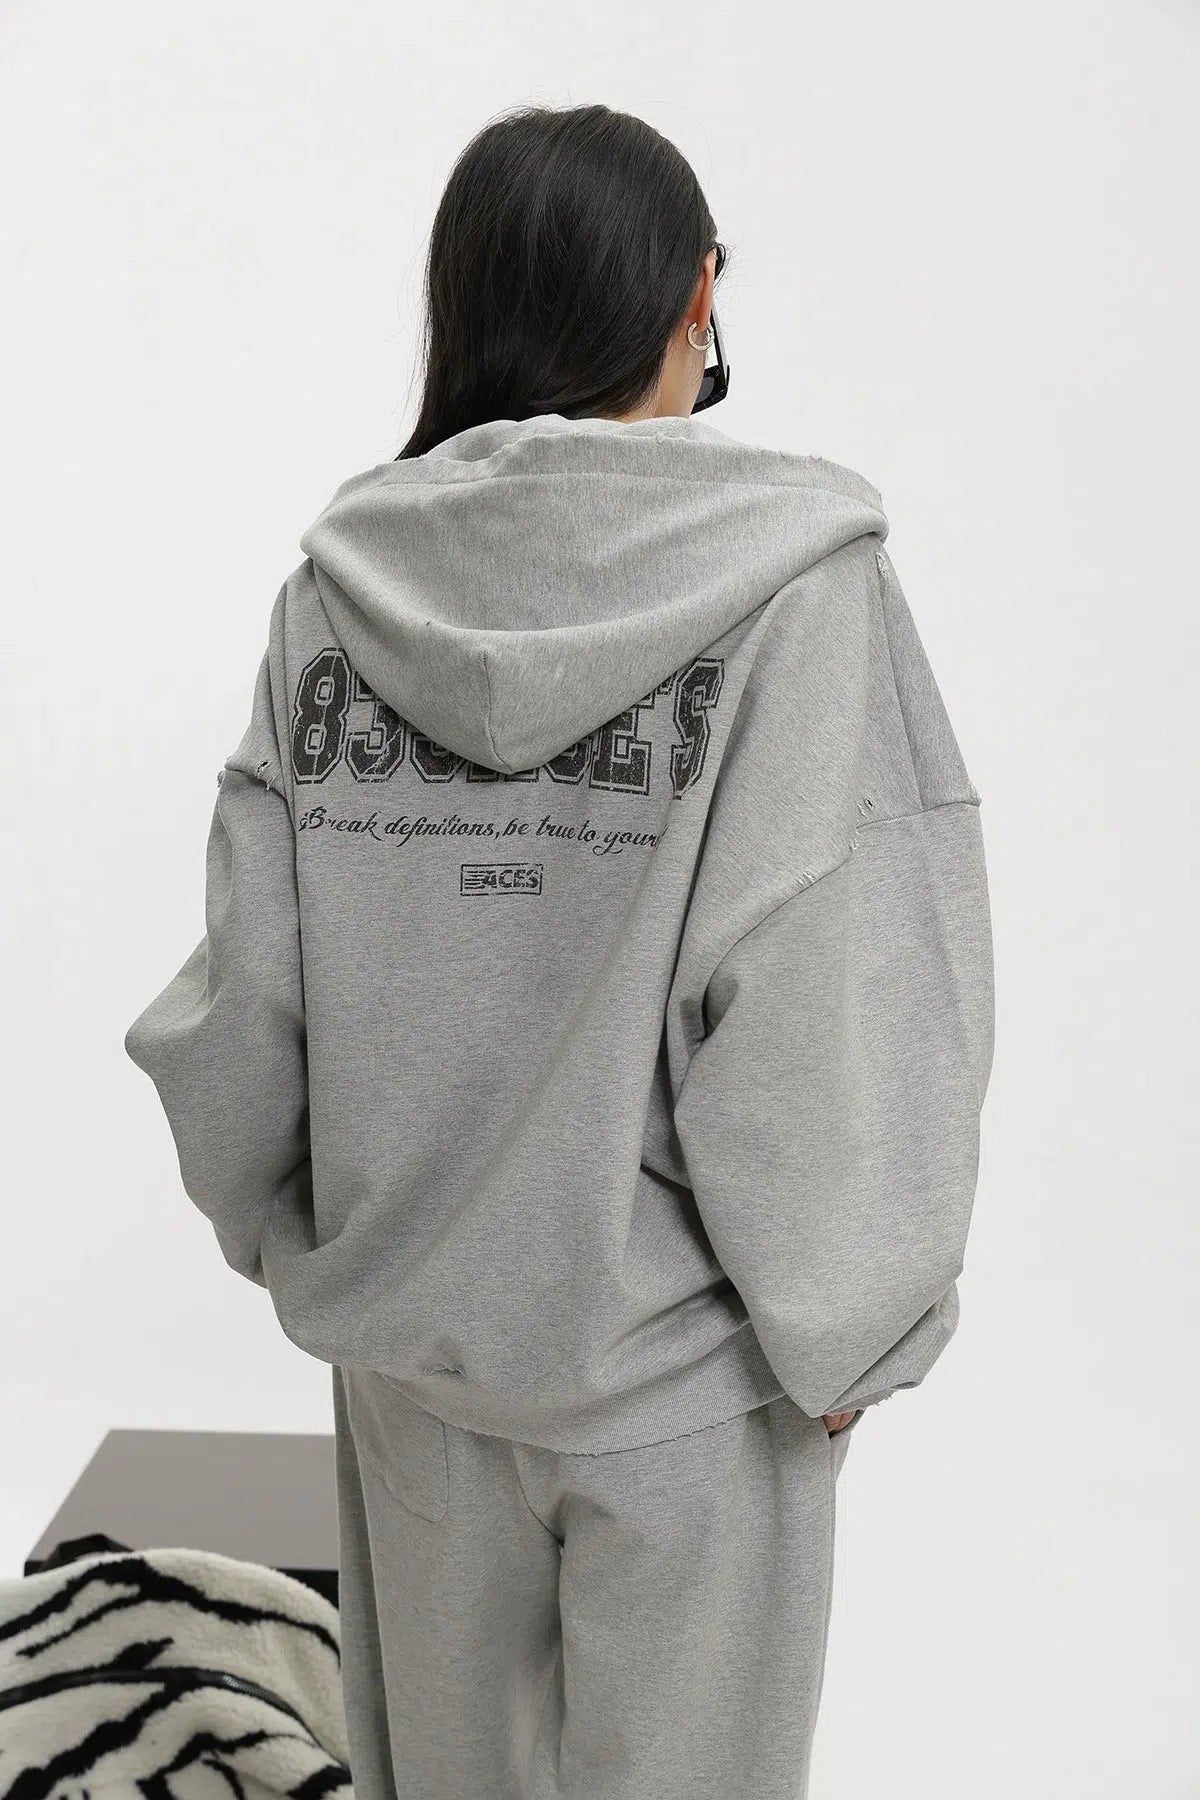 Ace Distressed Lettered Zip-Up Hoodie & Casual Sweatpants Set-korean-fashion-Clothing Set-Ace's Closet-OH Garments